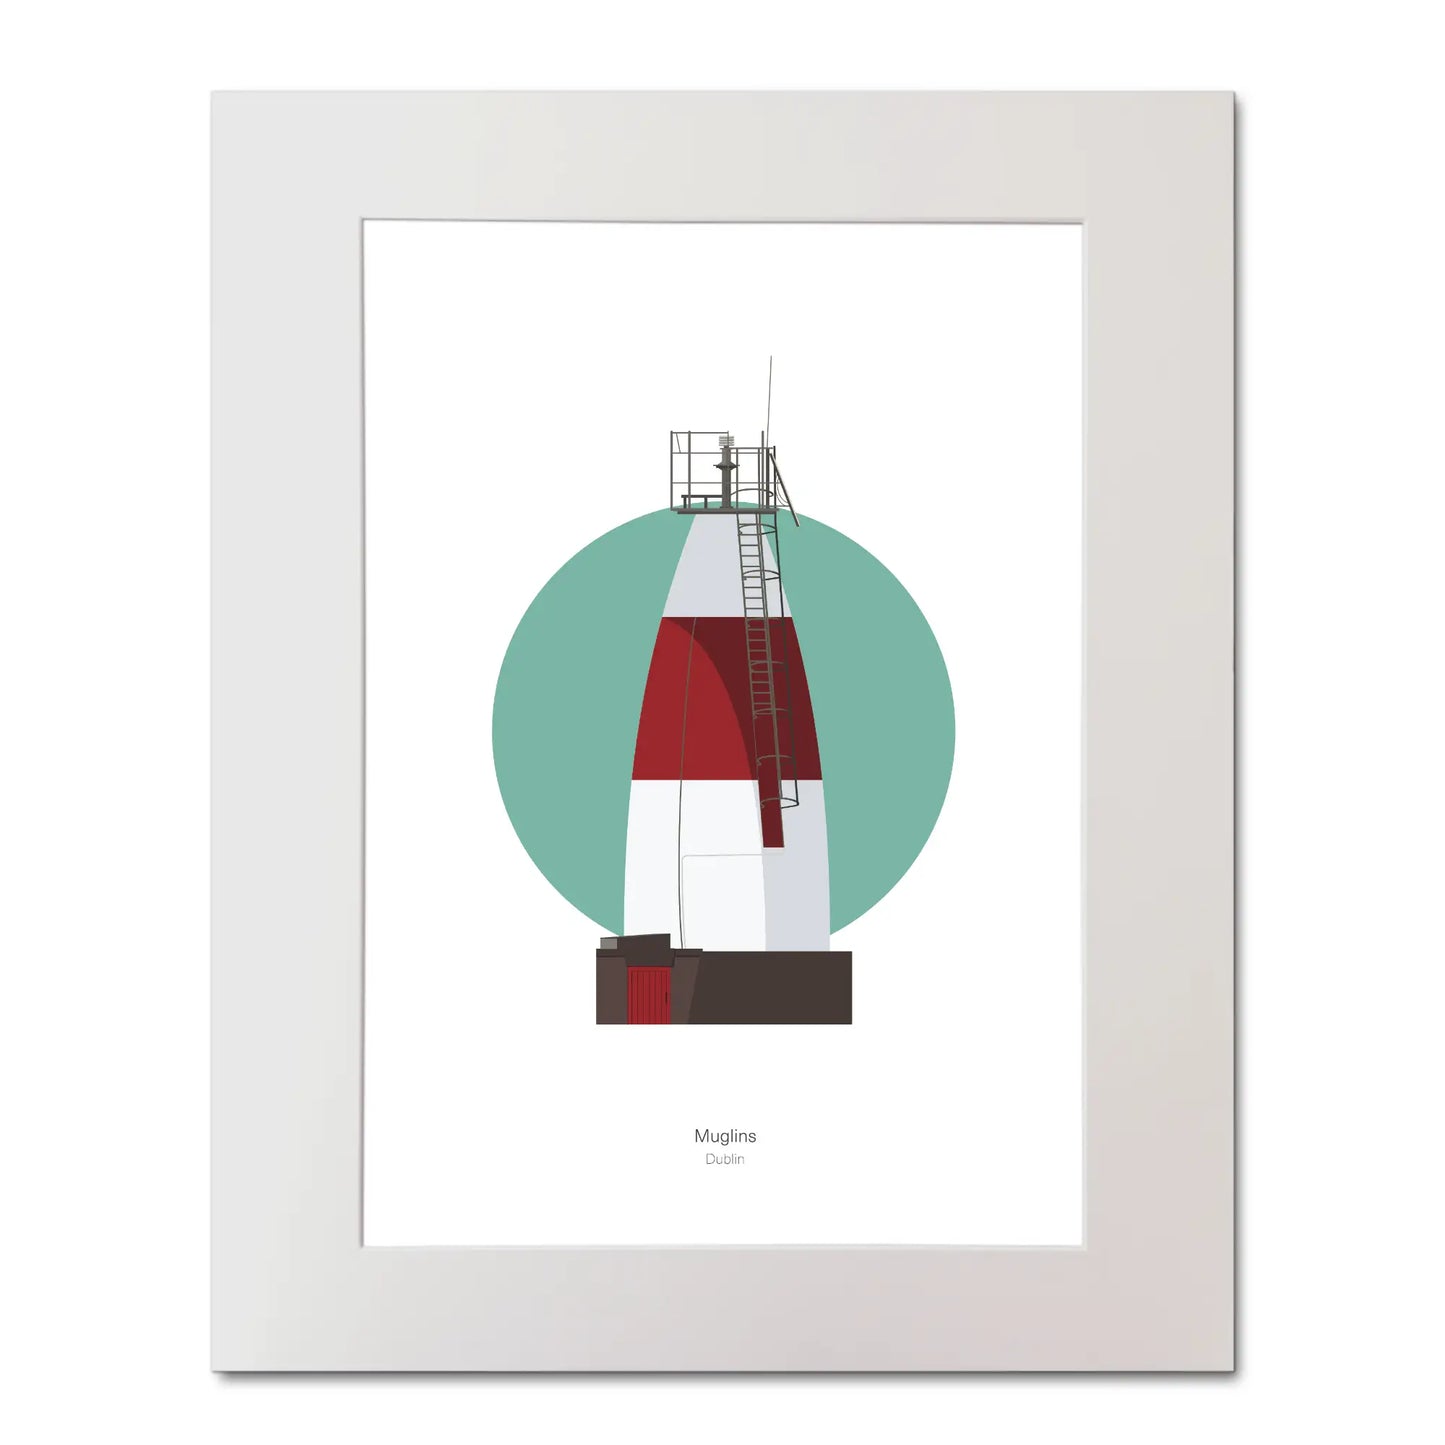 Contemporary illustration of Muglins lighthouse on a white background inside light blue square, mounted and measuring 40x50cm.